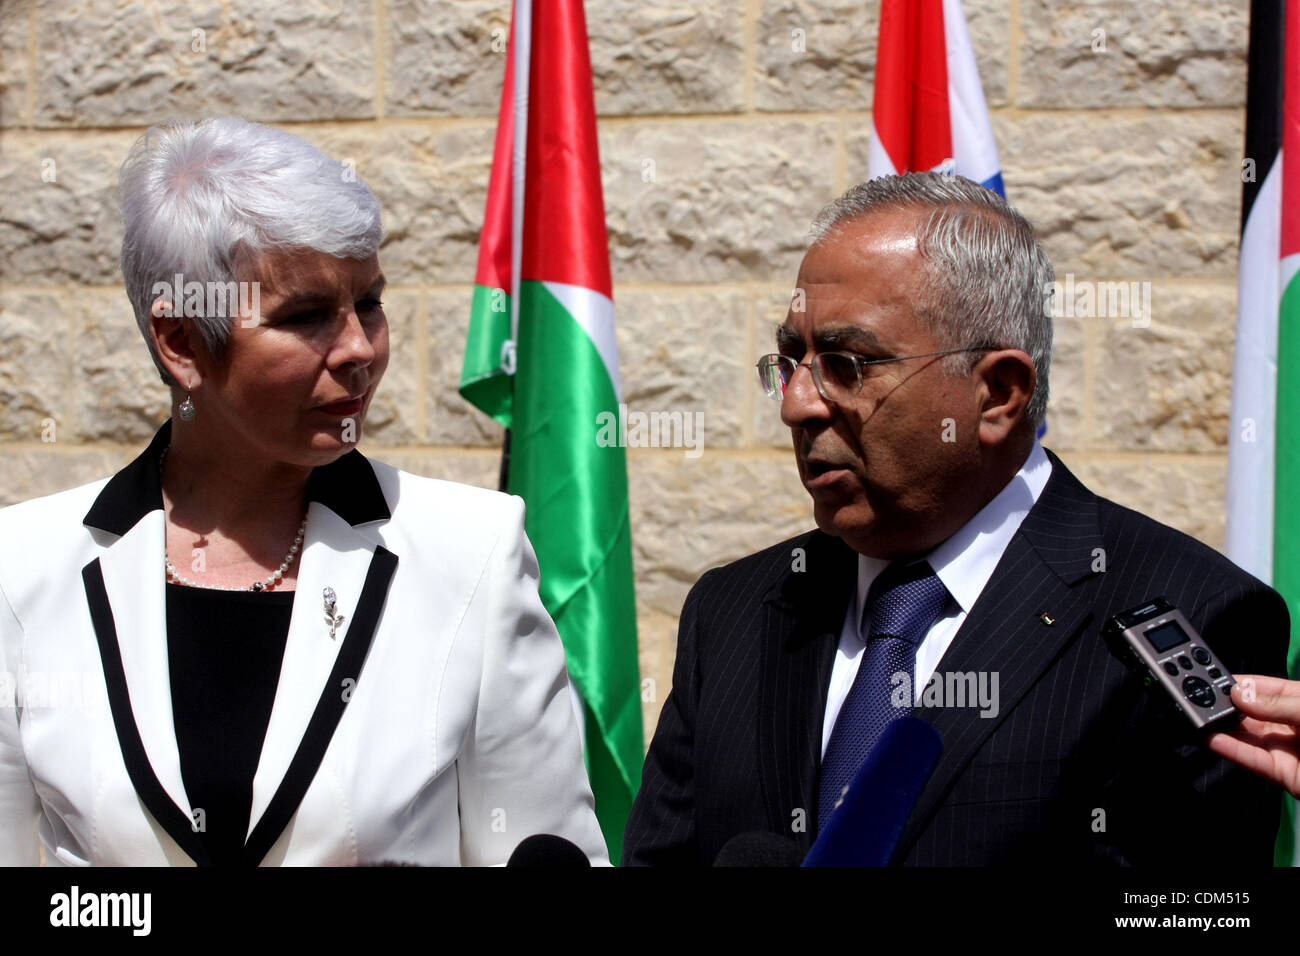 Palestinian Prime Minister Salam Fayyad and  his Croatian counterpart Jadranka Kosor attend a joint press conference after their meeting in the West Bank city of Ramallah, on March 31, 2011. Photo by Issam Rimawi Stock Photo